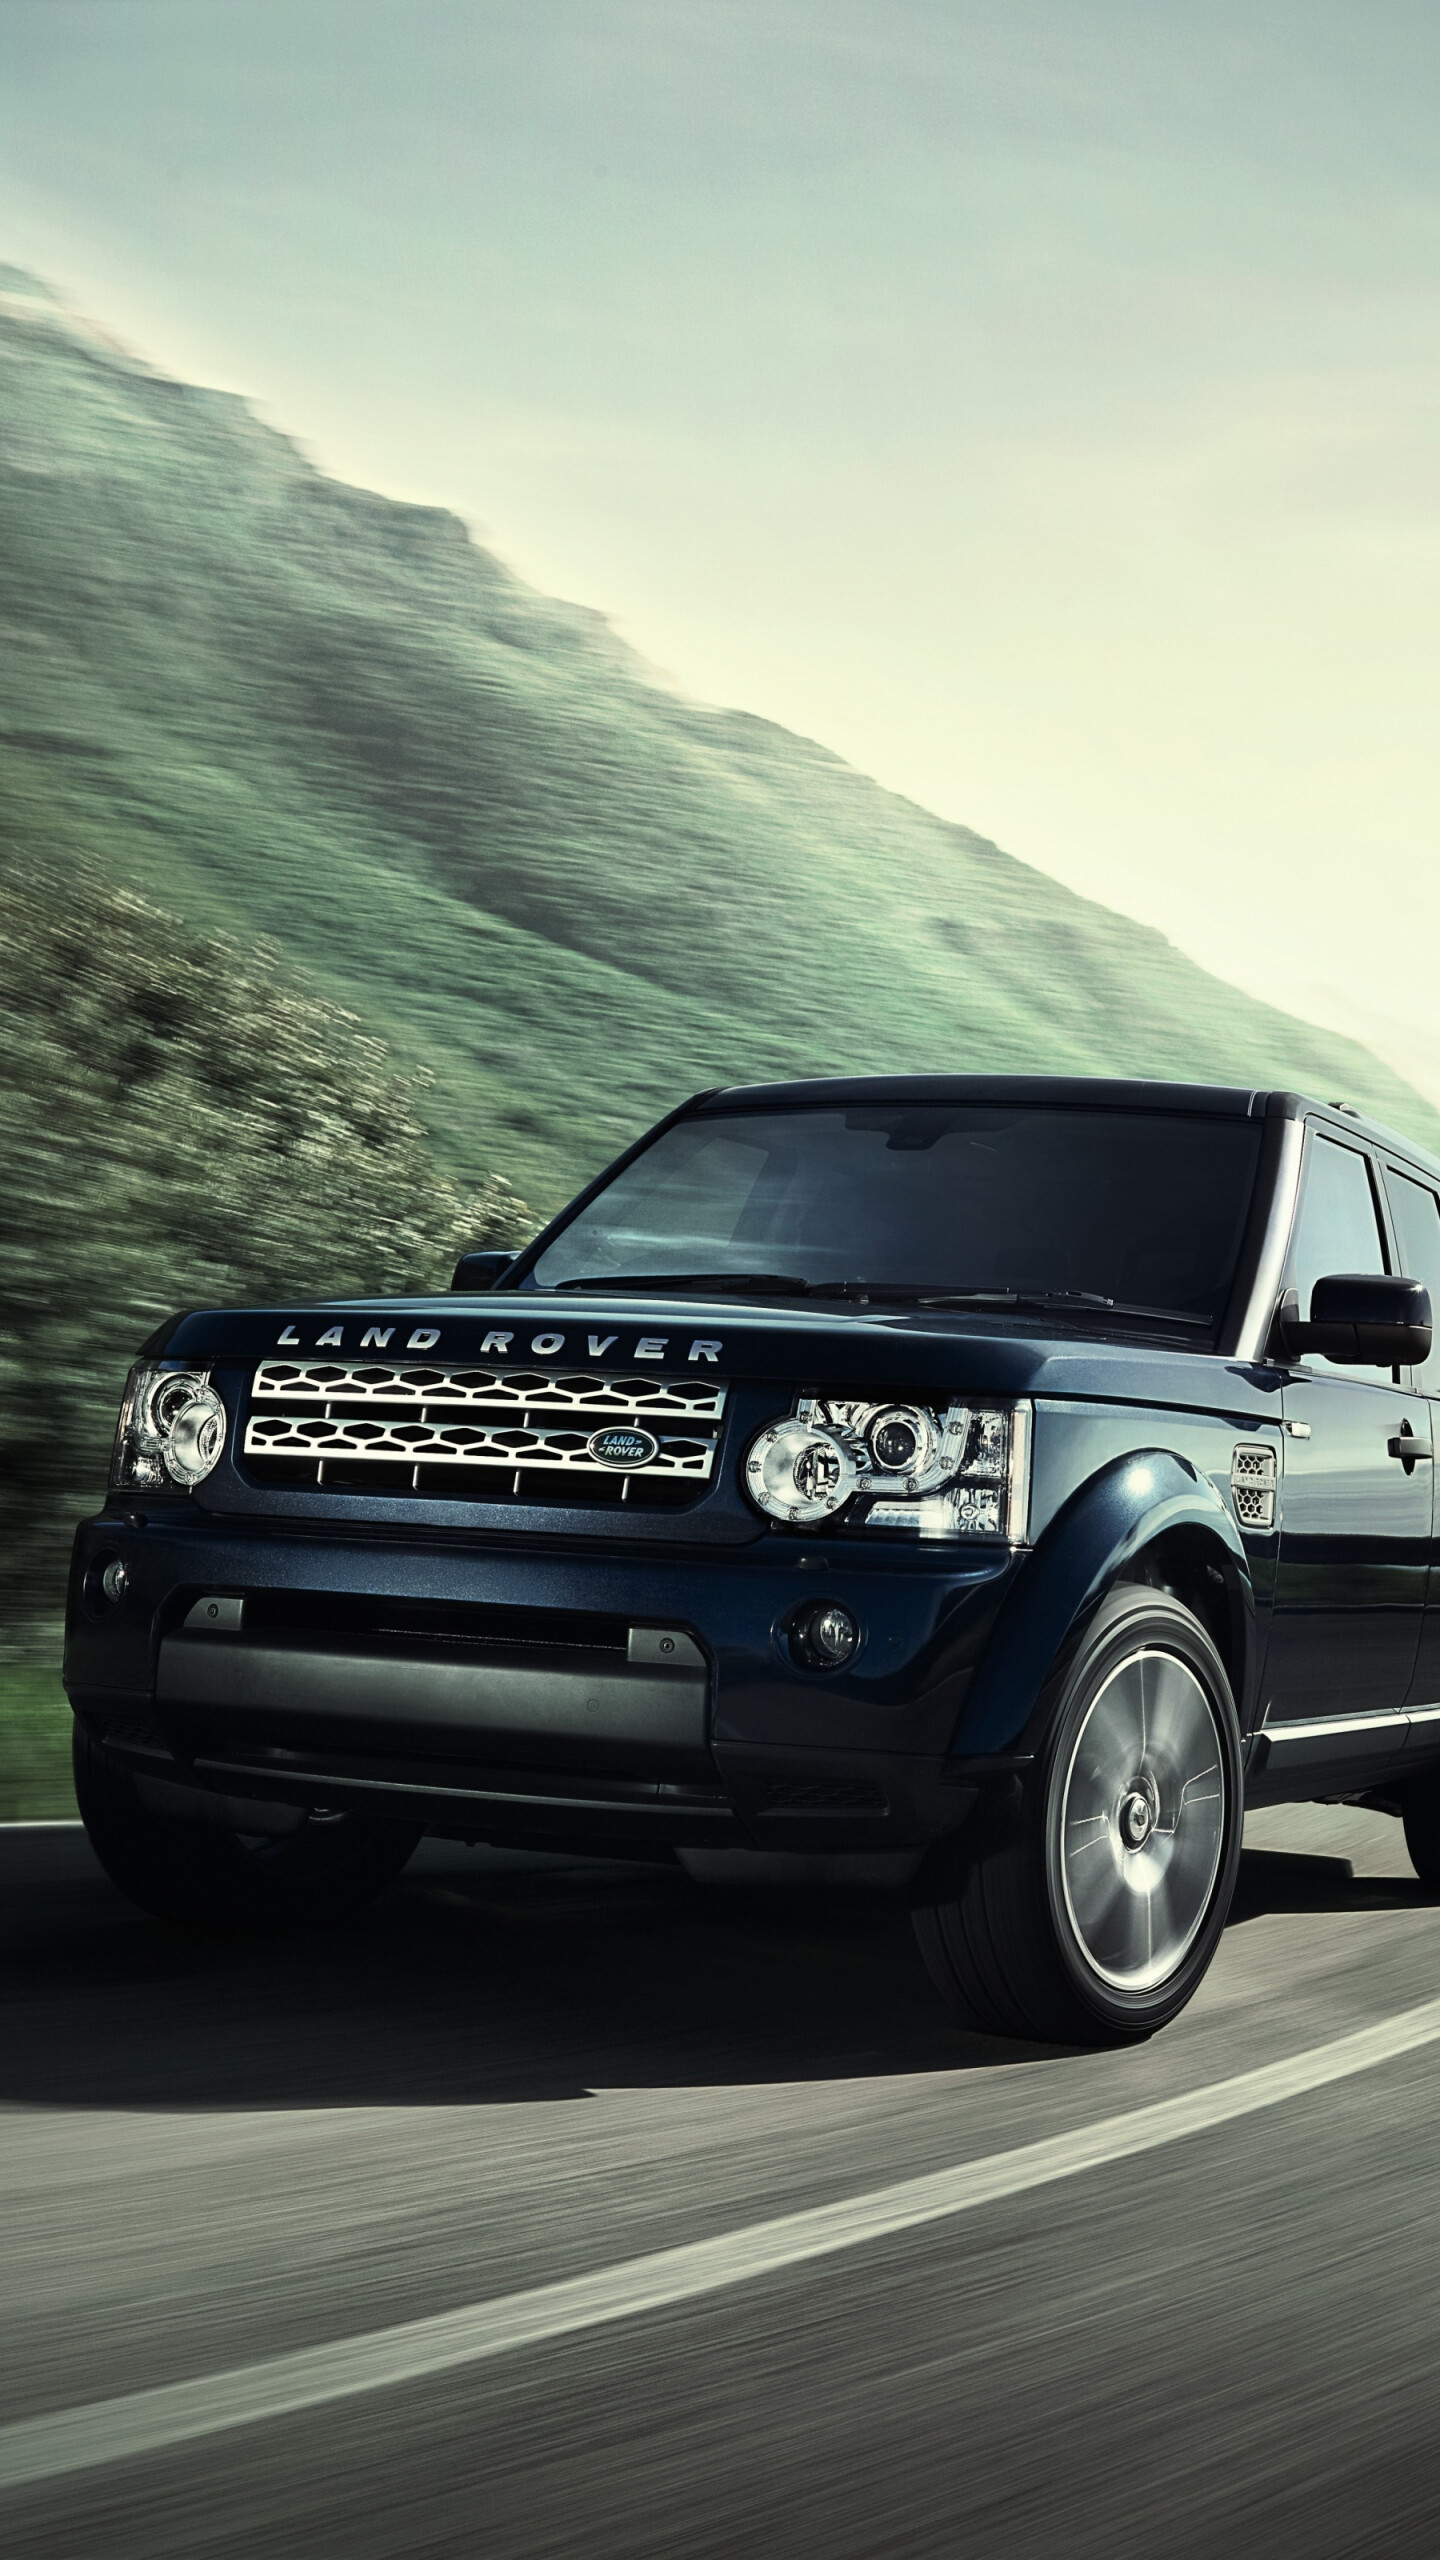 Land Rover: Model Discovery was introduced in 1989, Automotive brand. 1440x2560 HD Wallpaper.